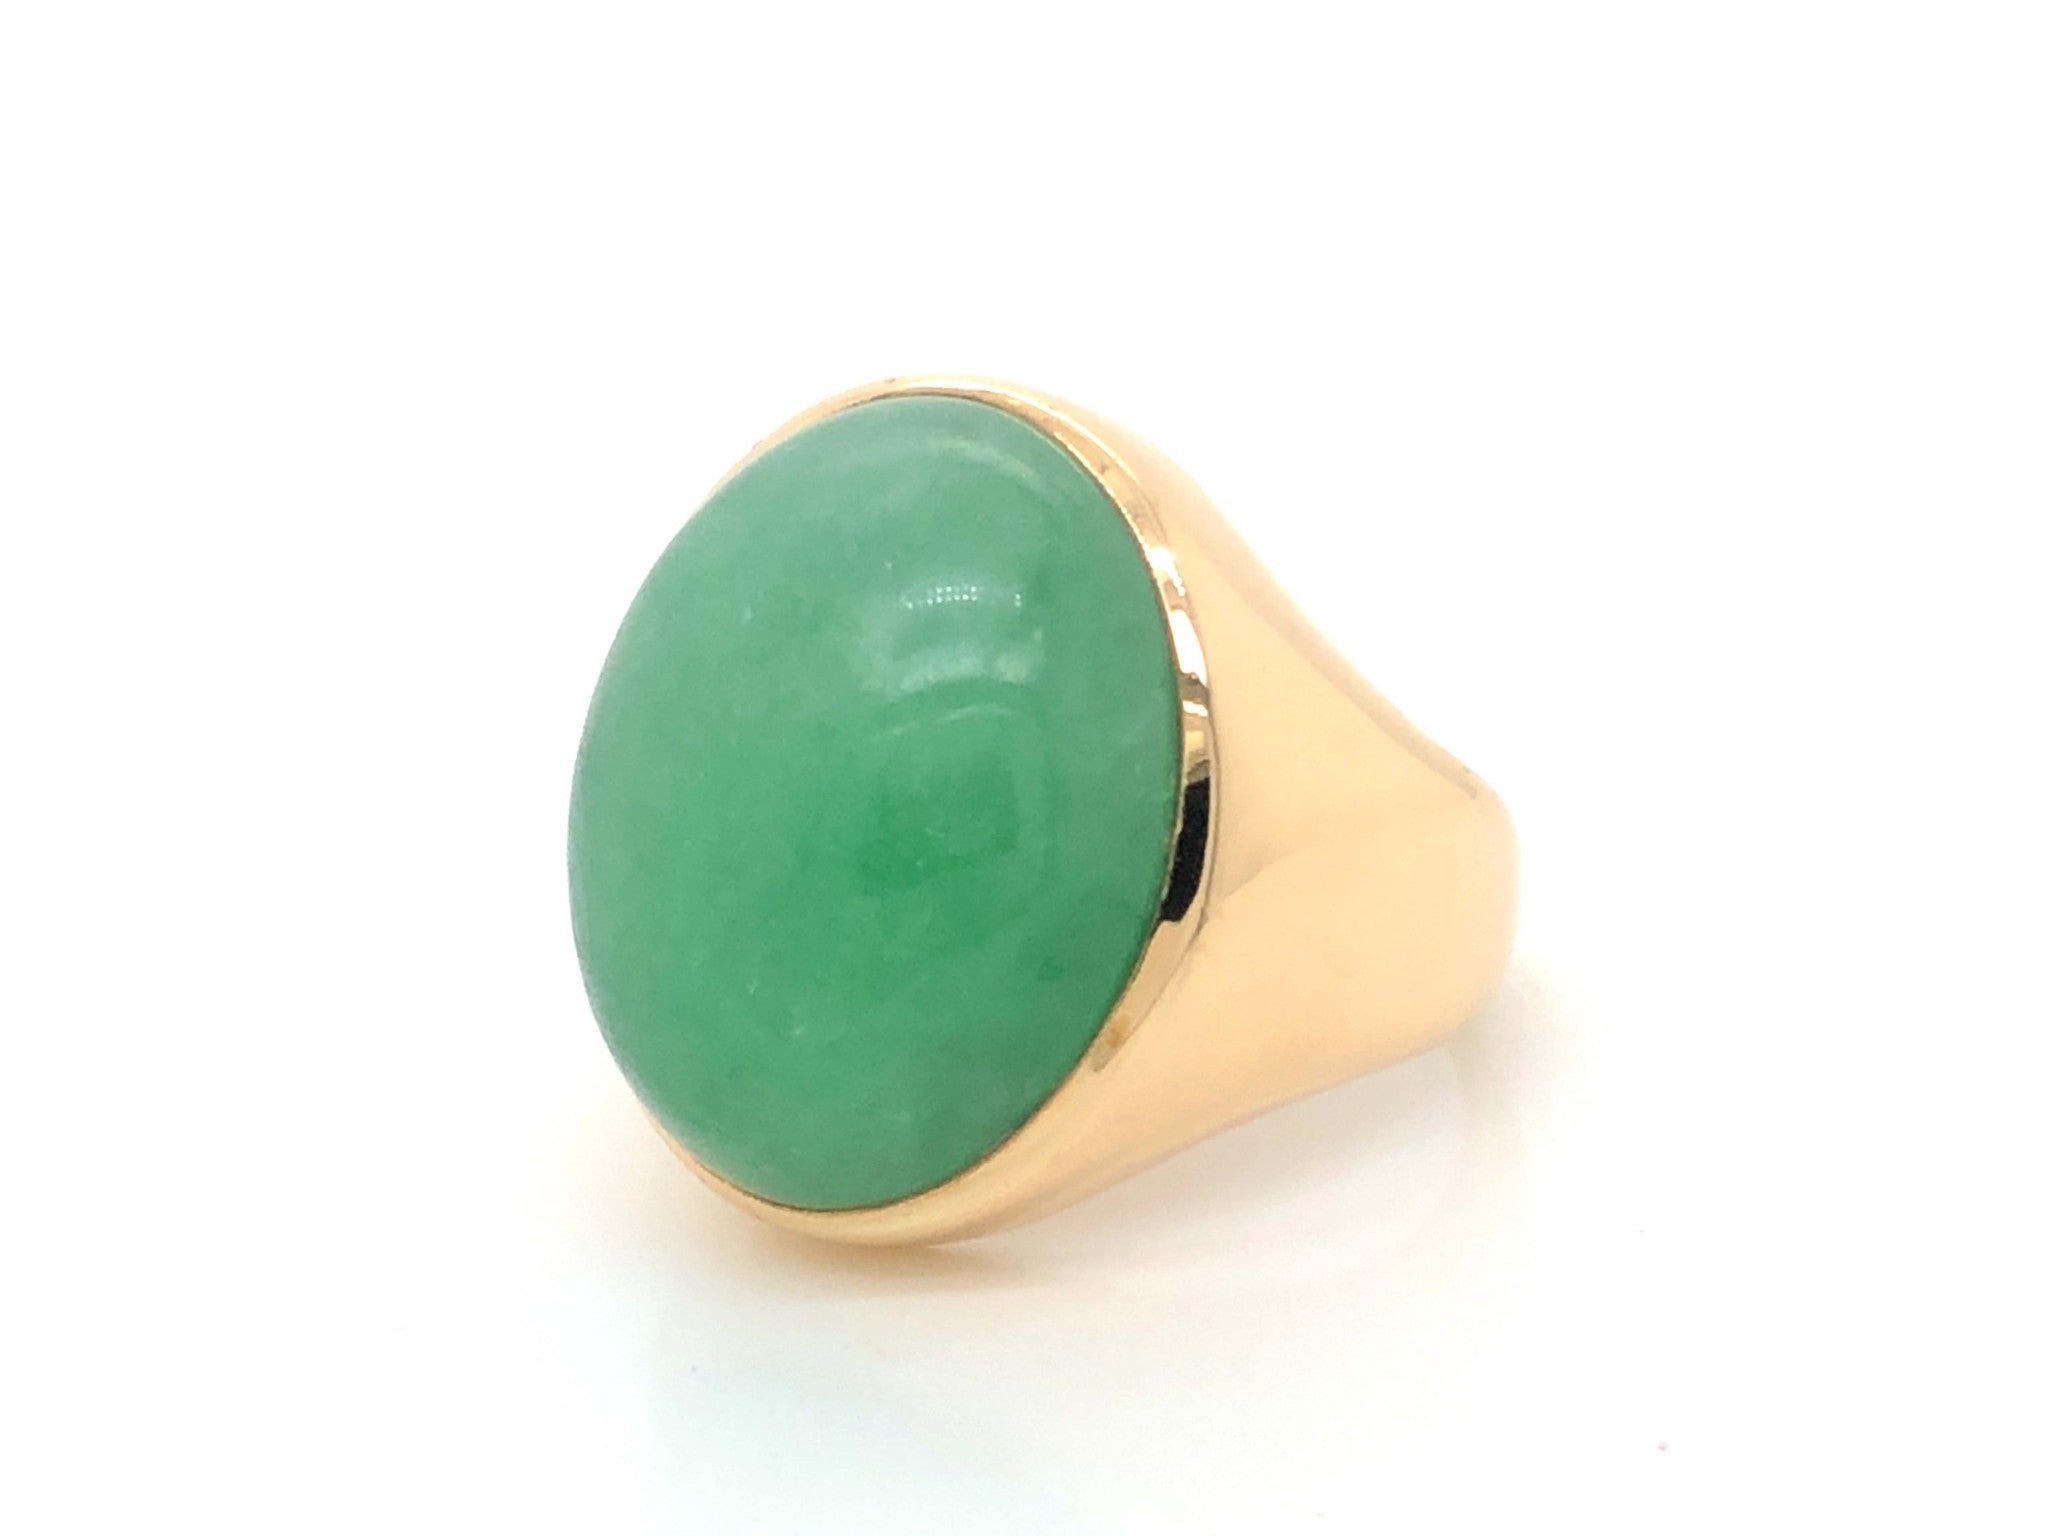 Vintage Men's Large Oval Cabochon Green Jade Ring - 14k Yellow Gold